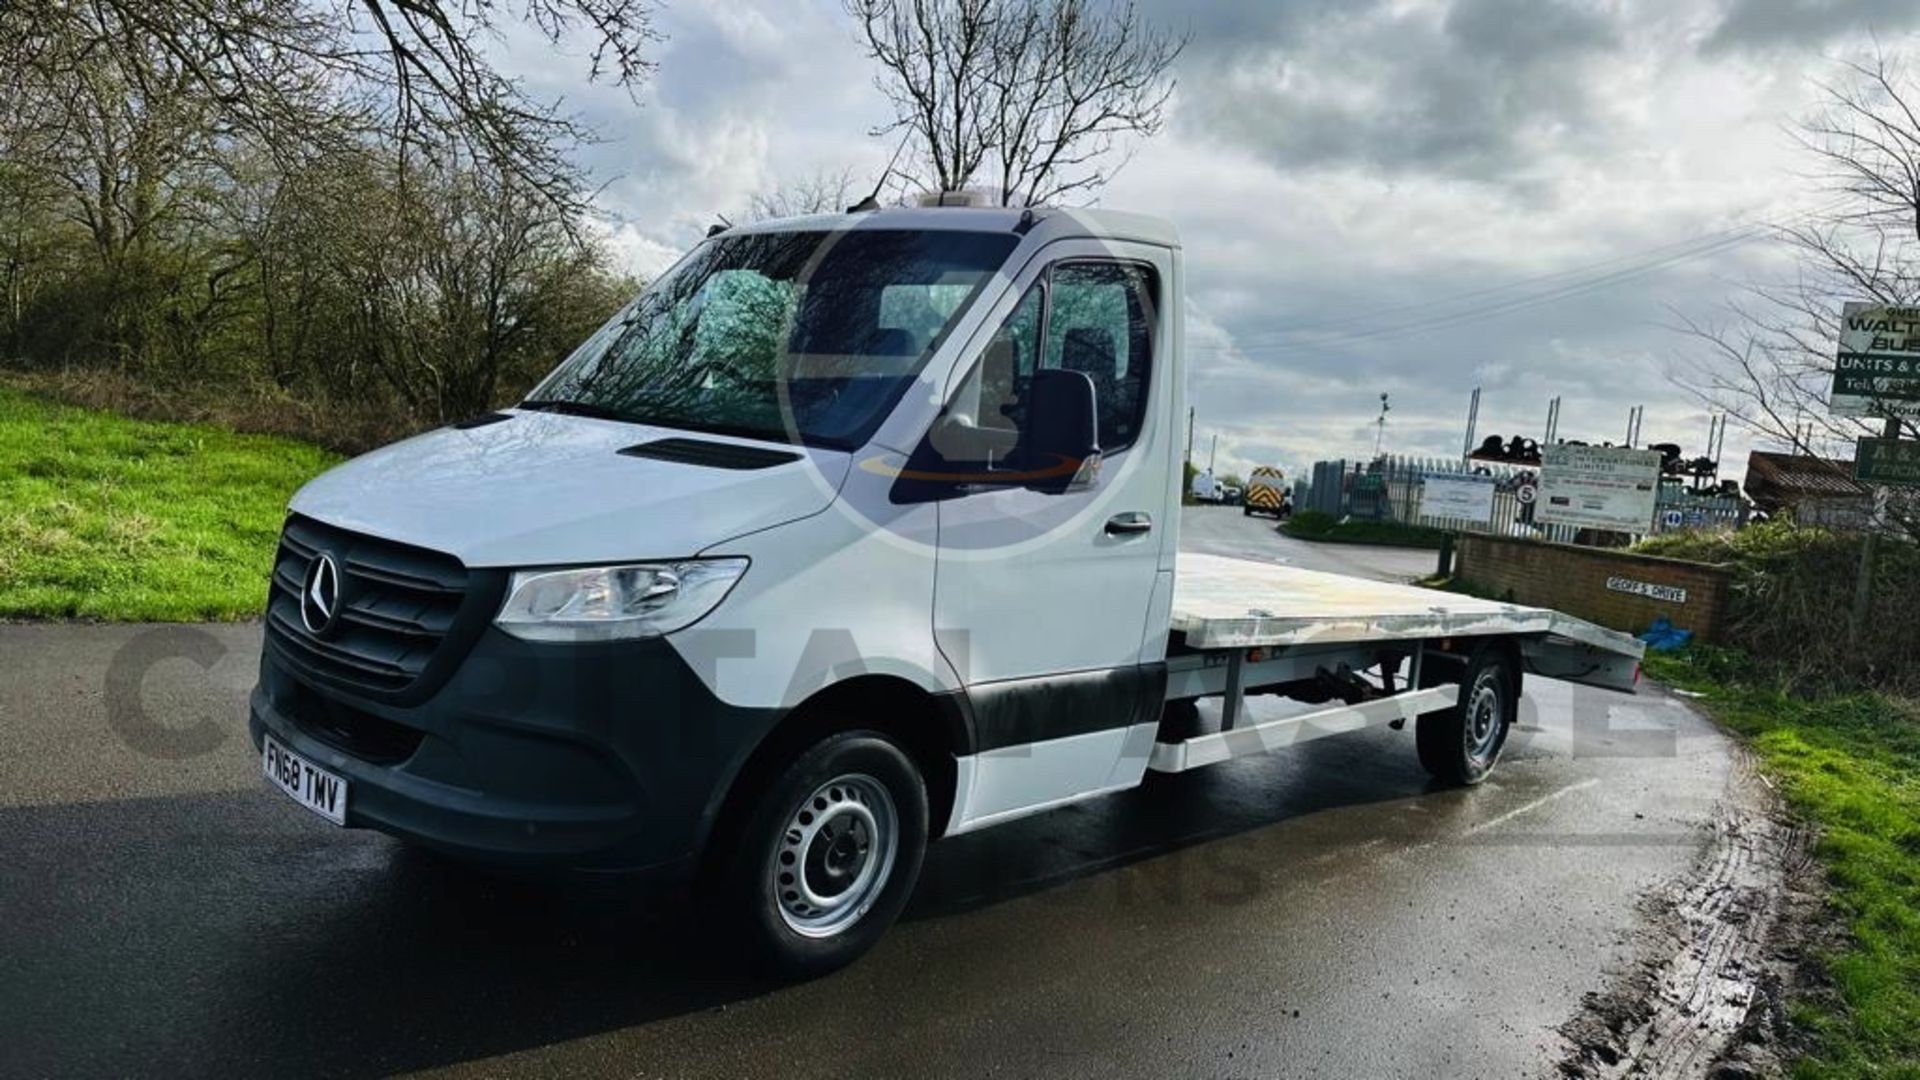 MERCEDES SPRINTER 314CDI "LWB RECOVERY TRUCK" 2019 MODEL - 1 OWNER - NEW BODY FITTED WITH ELEC WINCH - Image 7 of 37